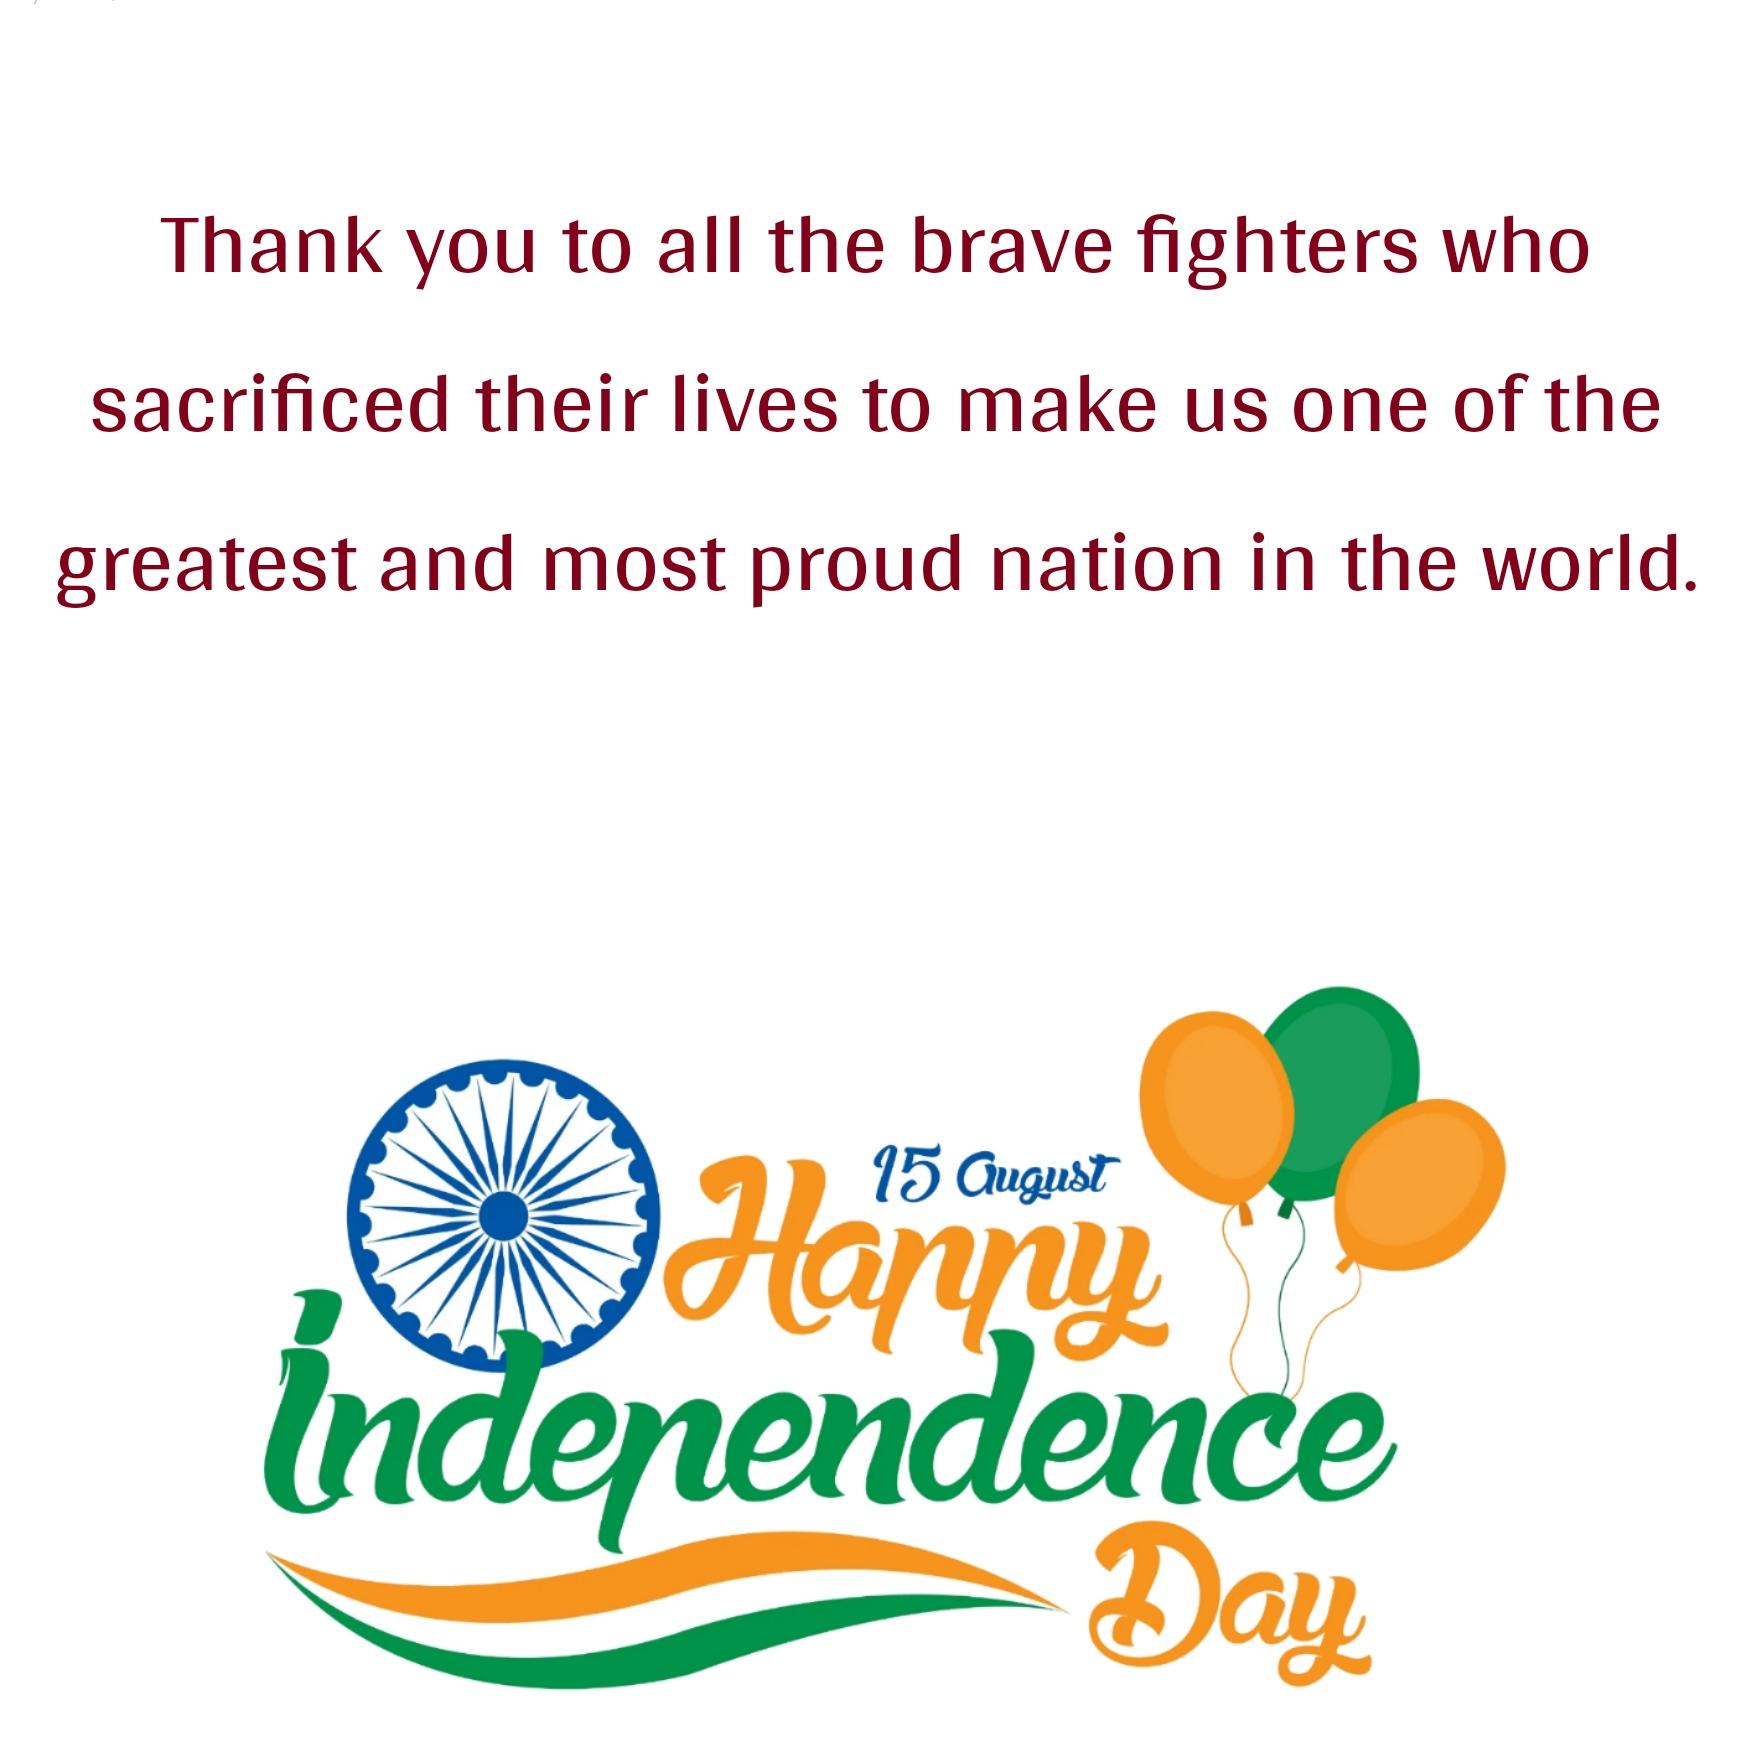 Thank you to all the brave fighters who sacrificed their lives